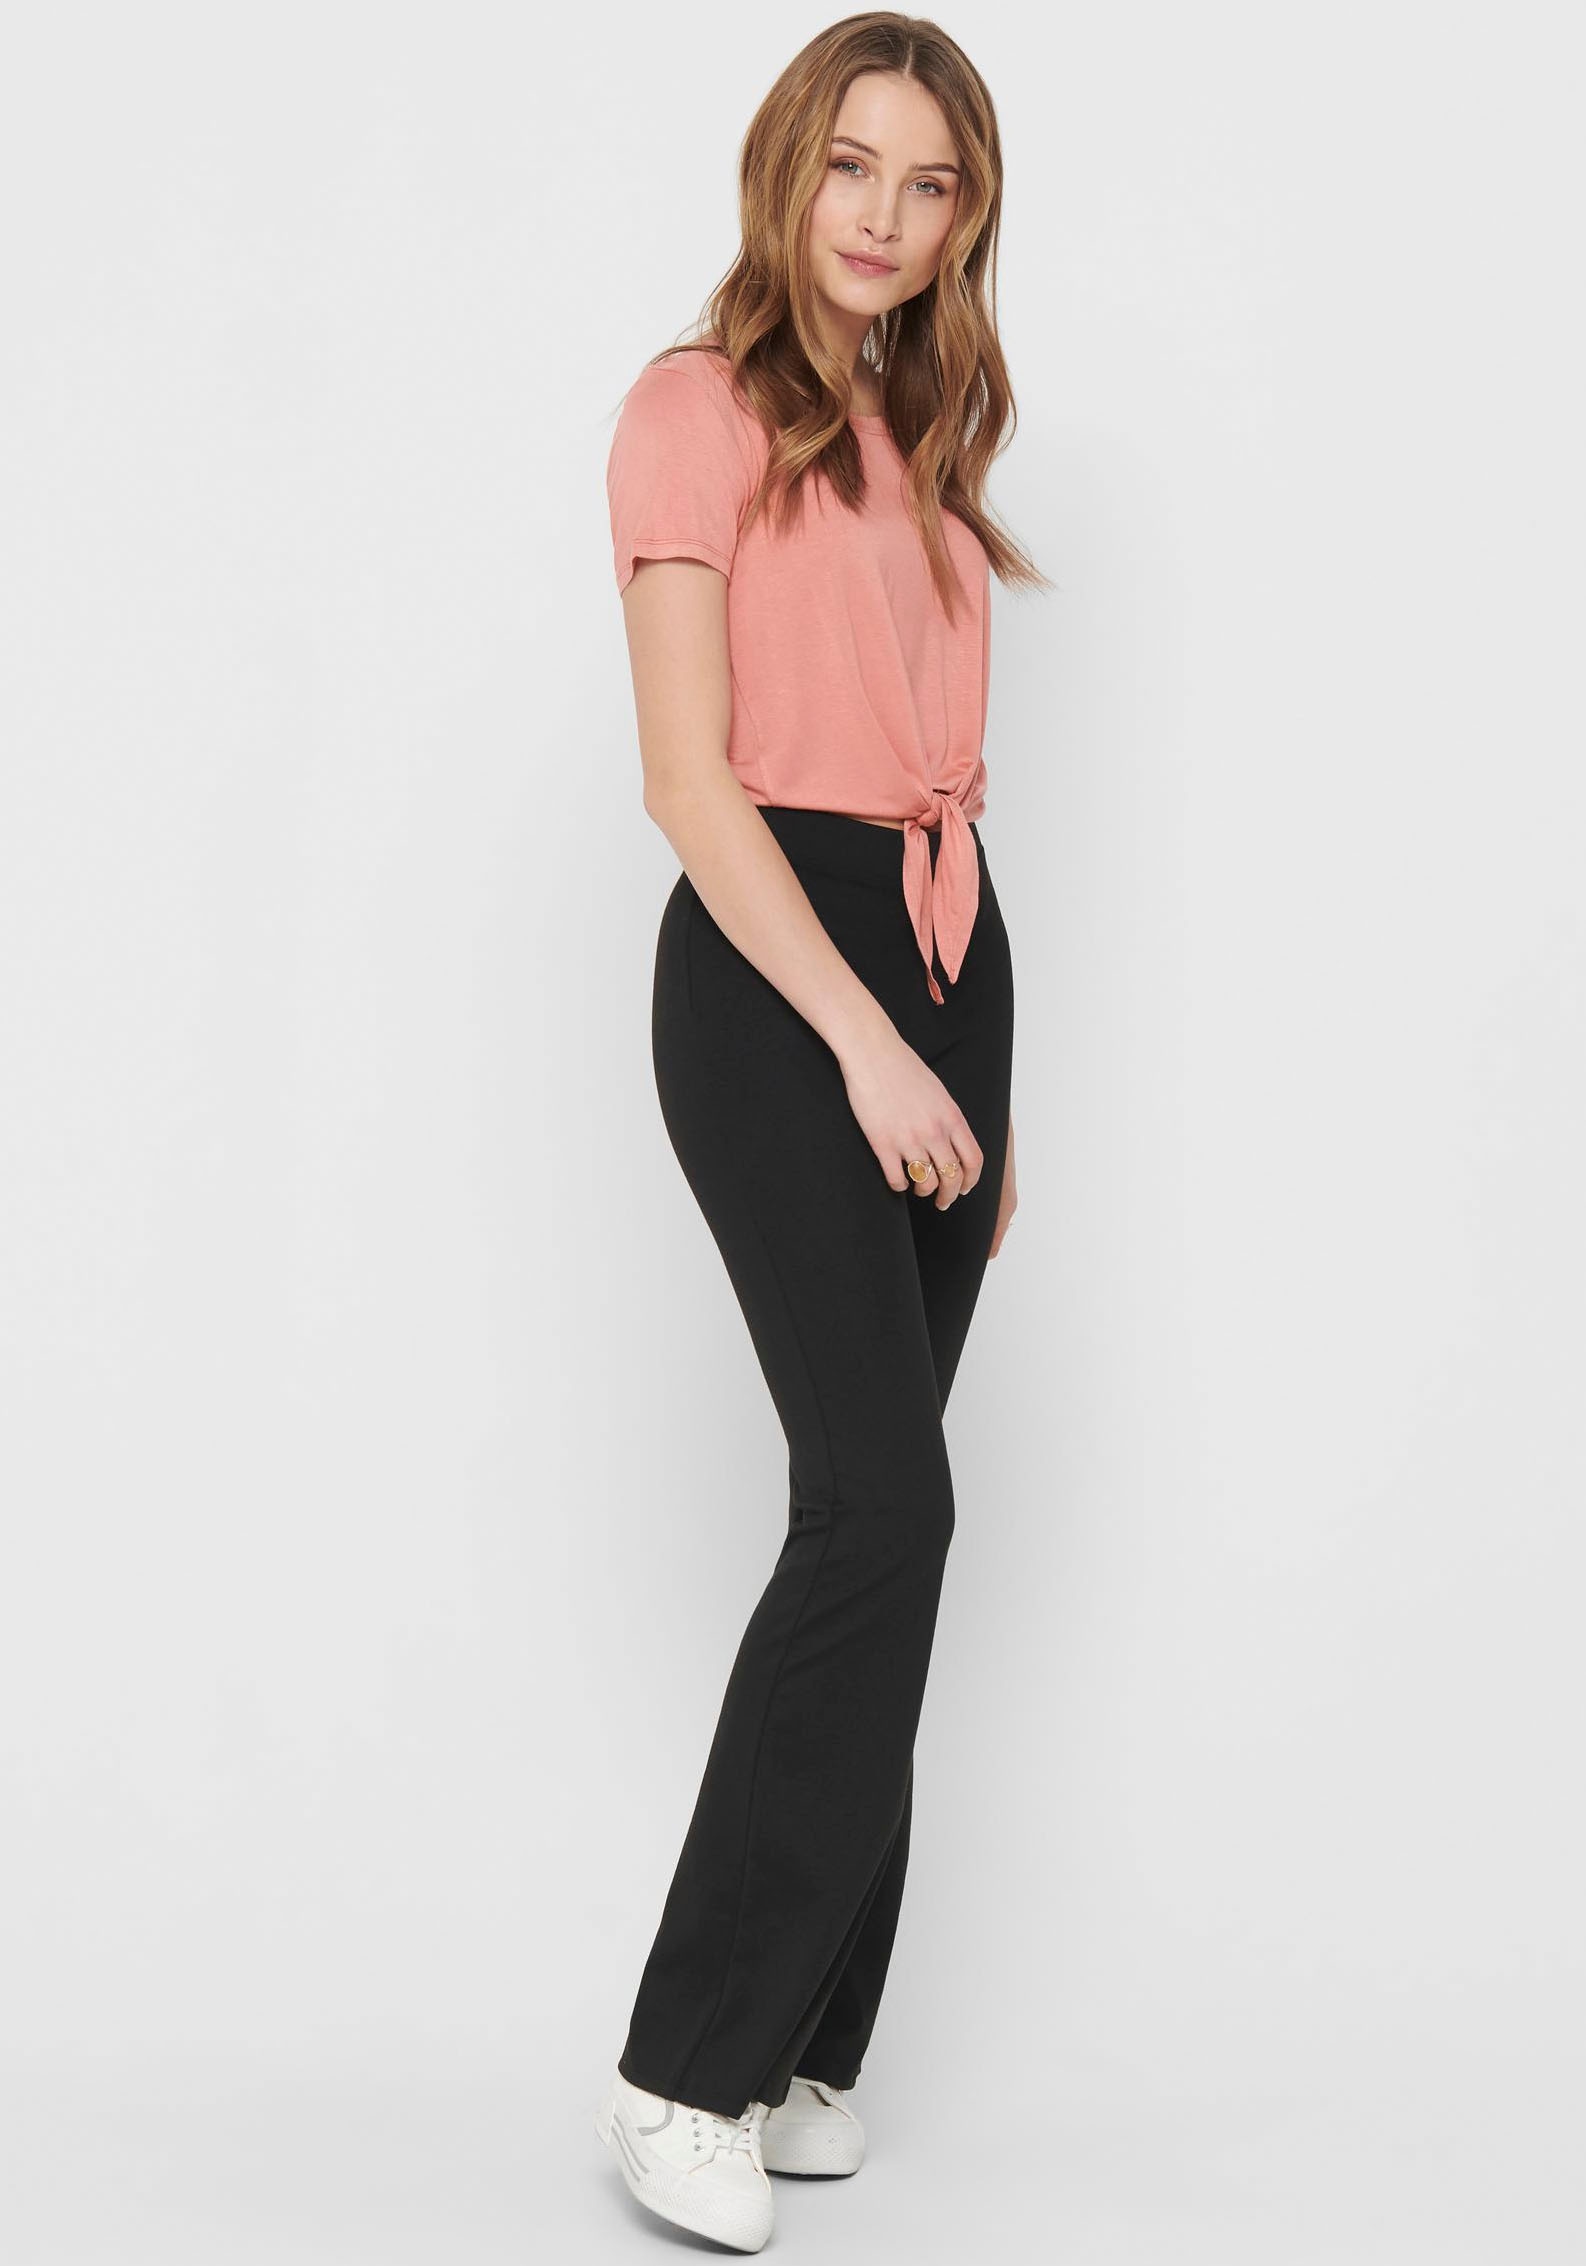 ♕ ONLY FLAIRED Jerseyhose bei »ONLFEVER JRS« STRETCH PANTS